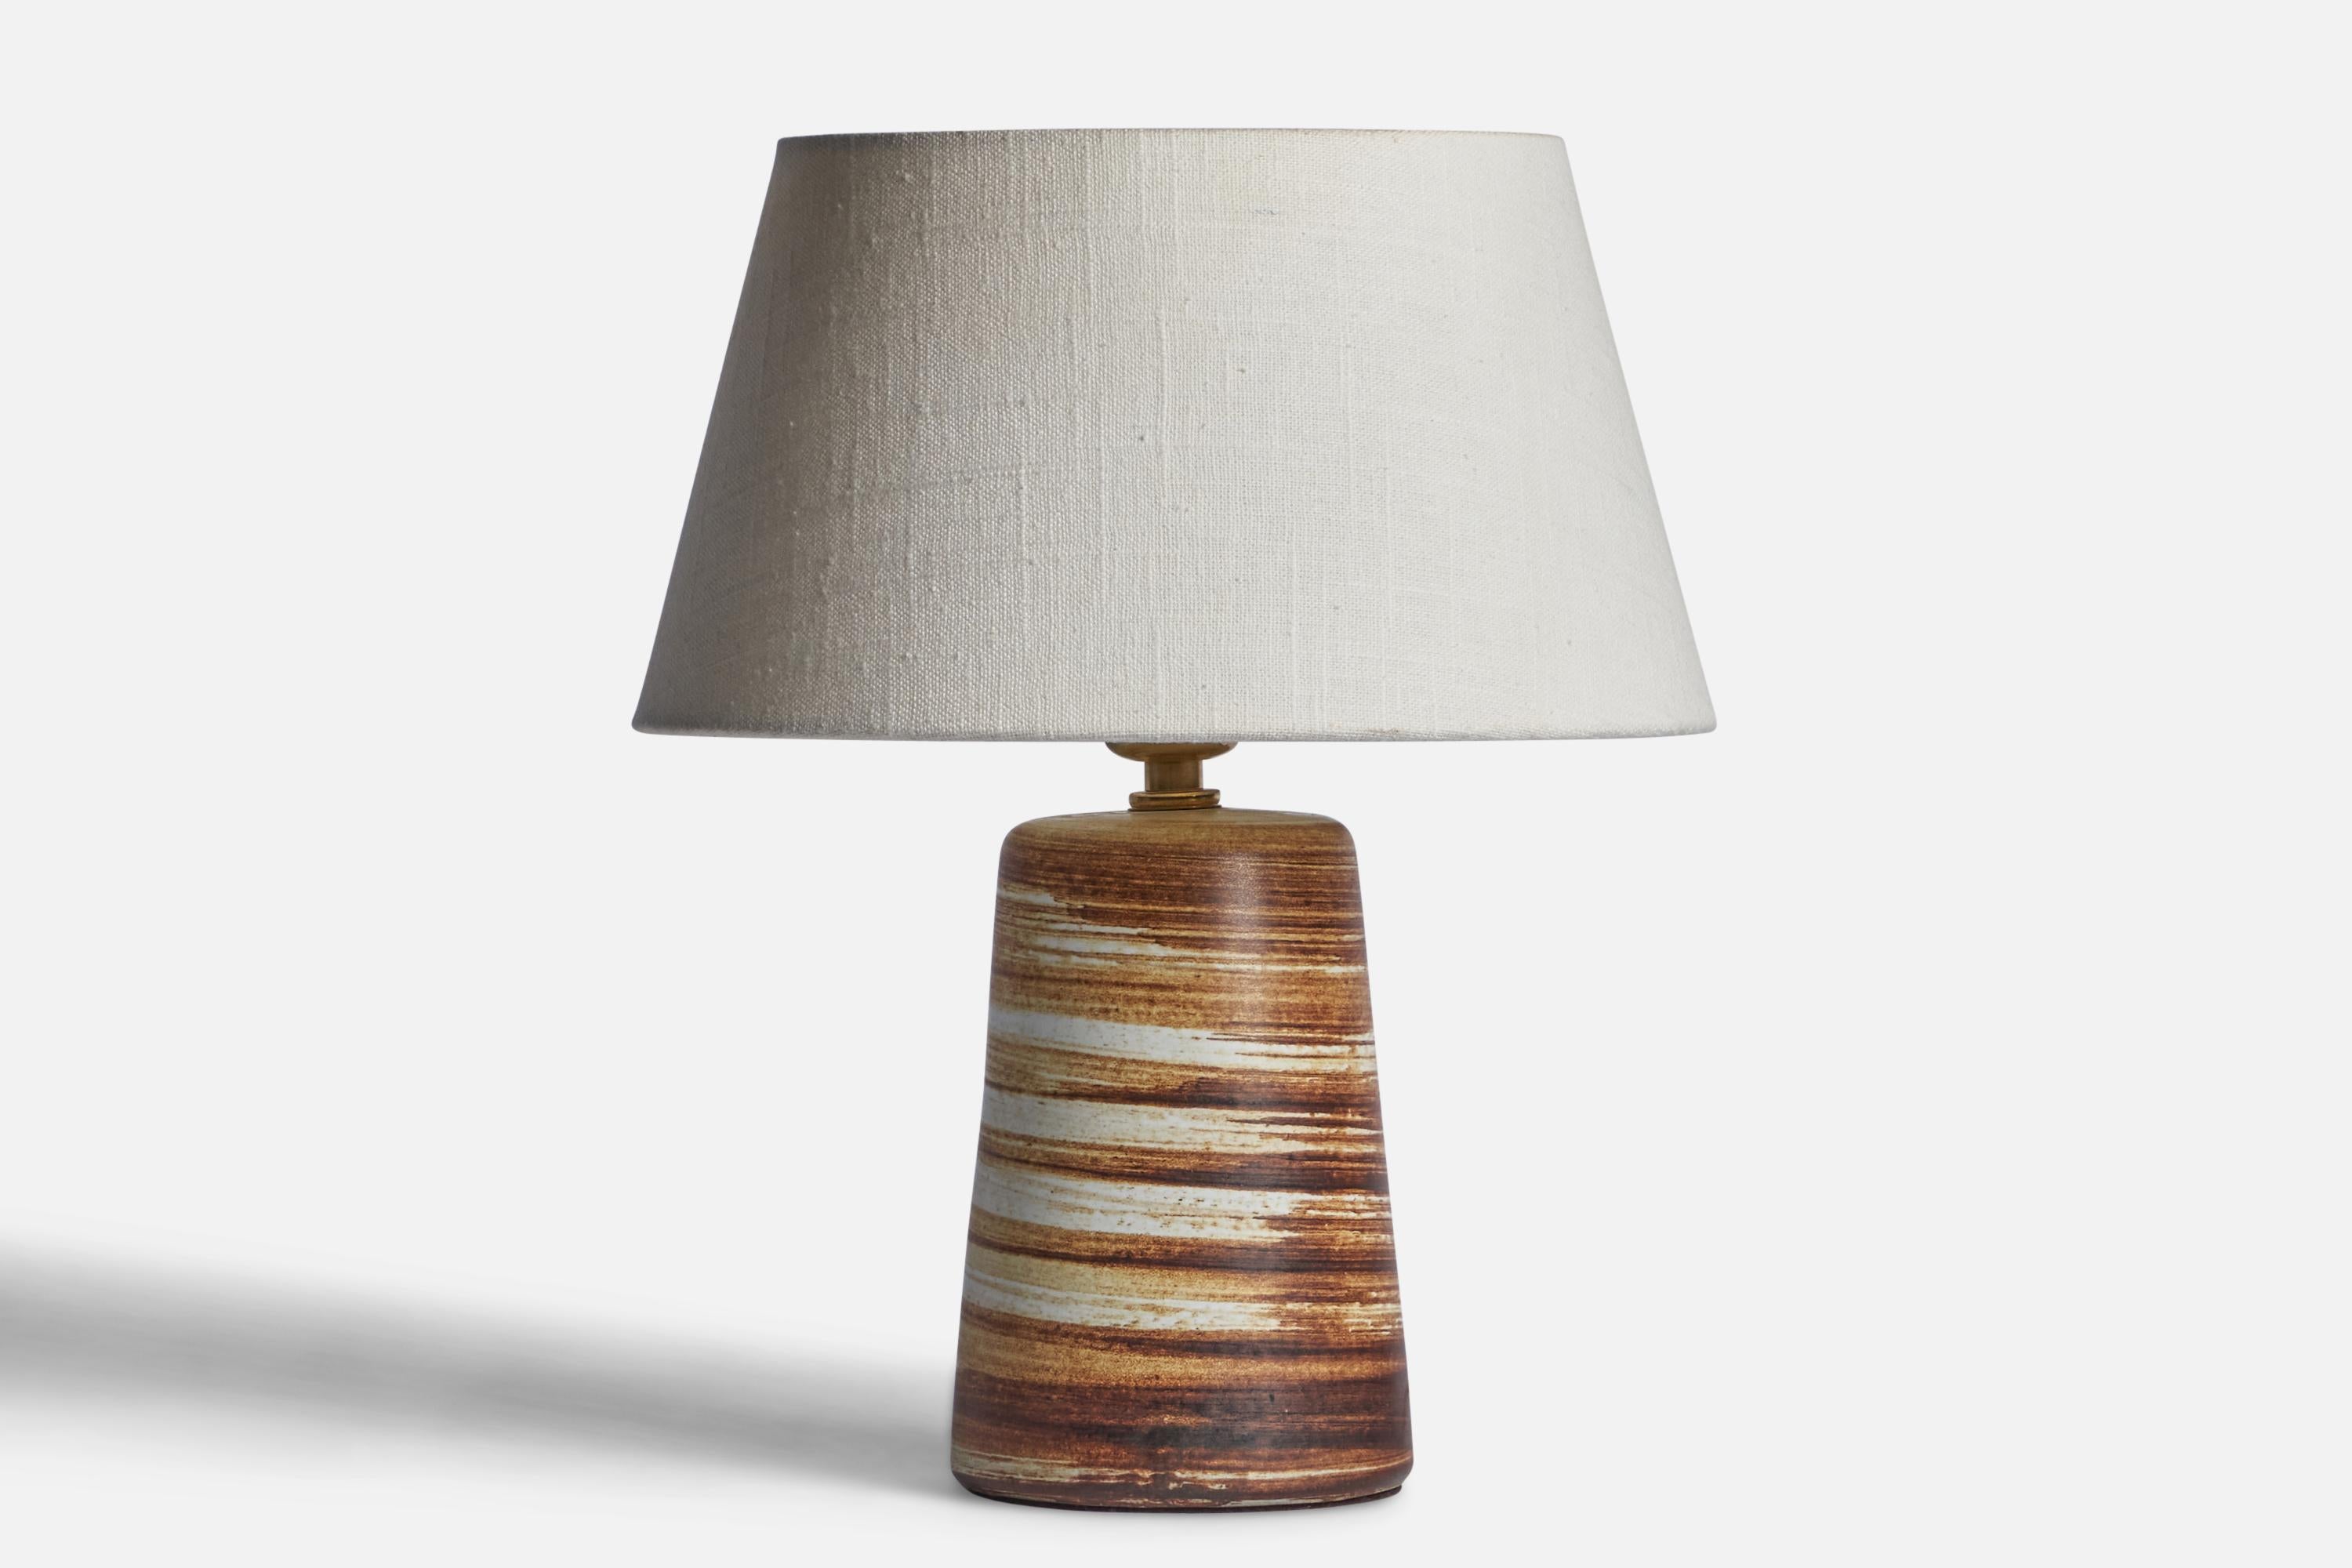 A beige and brown-glazed ceramic table lamp designed by Jane & Gordon Martz and produced by Marshall Studios, USA, 1960s.
Dimensions of Lamp (inches): 9.2” H x 4.3” Diameter
Dimensions of Shade (inches): 7” Top Diameter x 10” Bottom Diameter x 5.5”